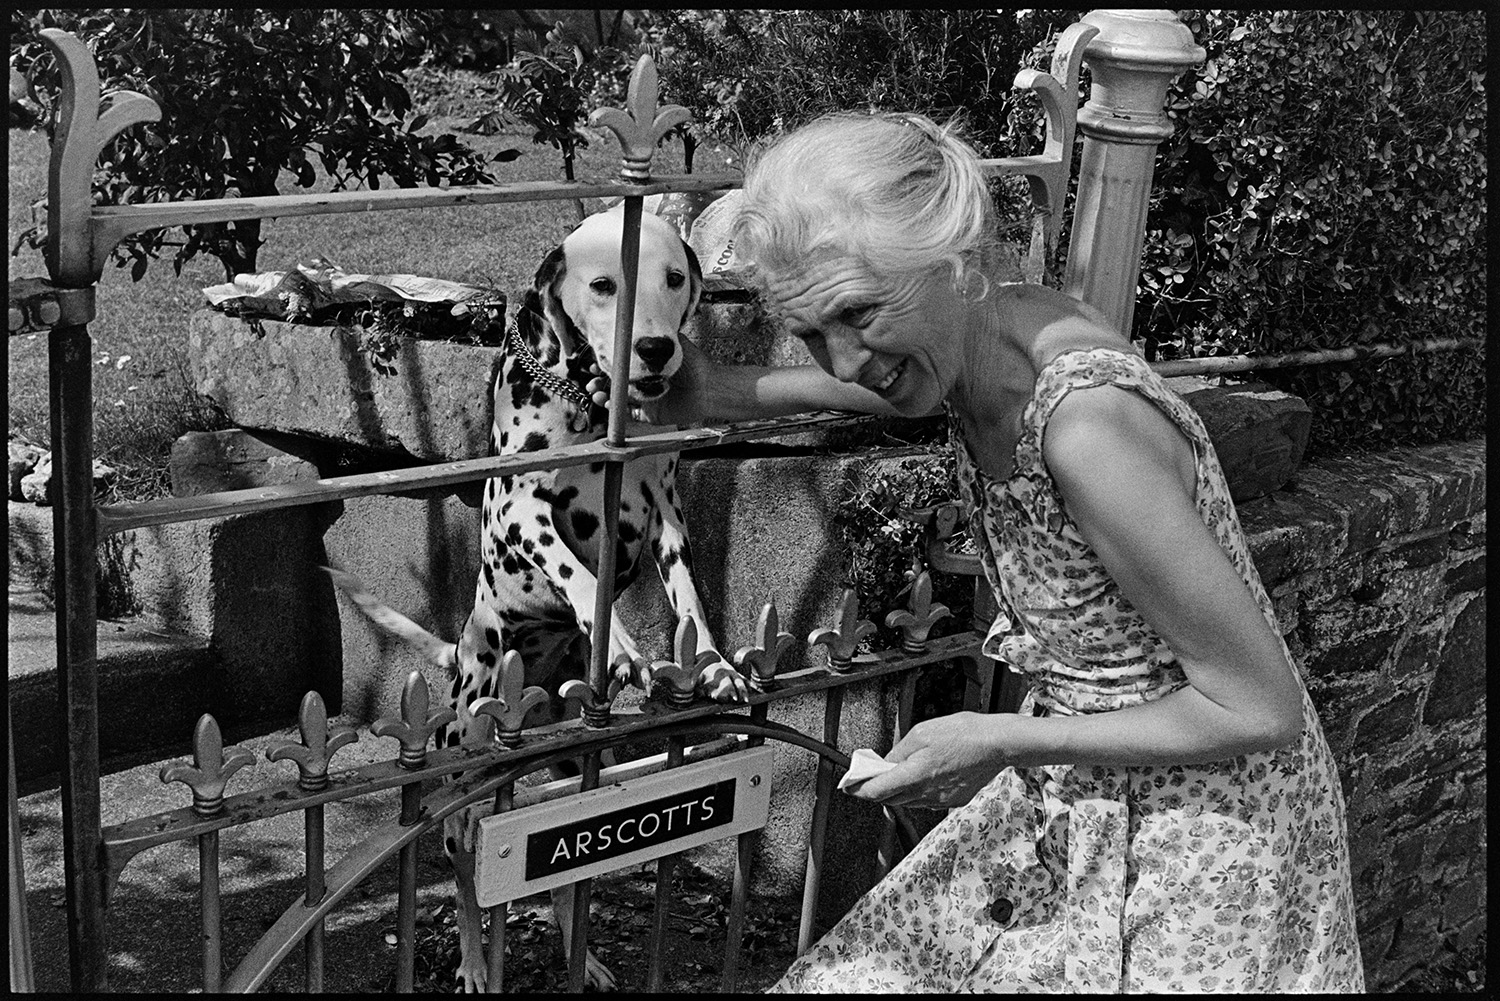 Woman at gate with her dog. 
[Marge Knight stroking her Dalmatian dog through the garden gate at Arscotts, Dolton.]